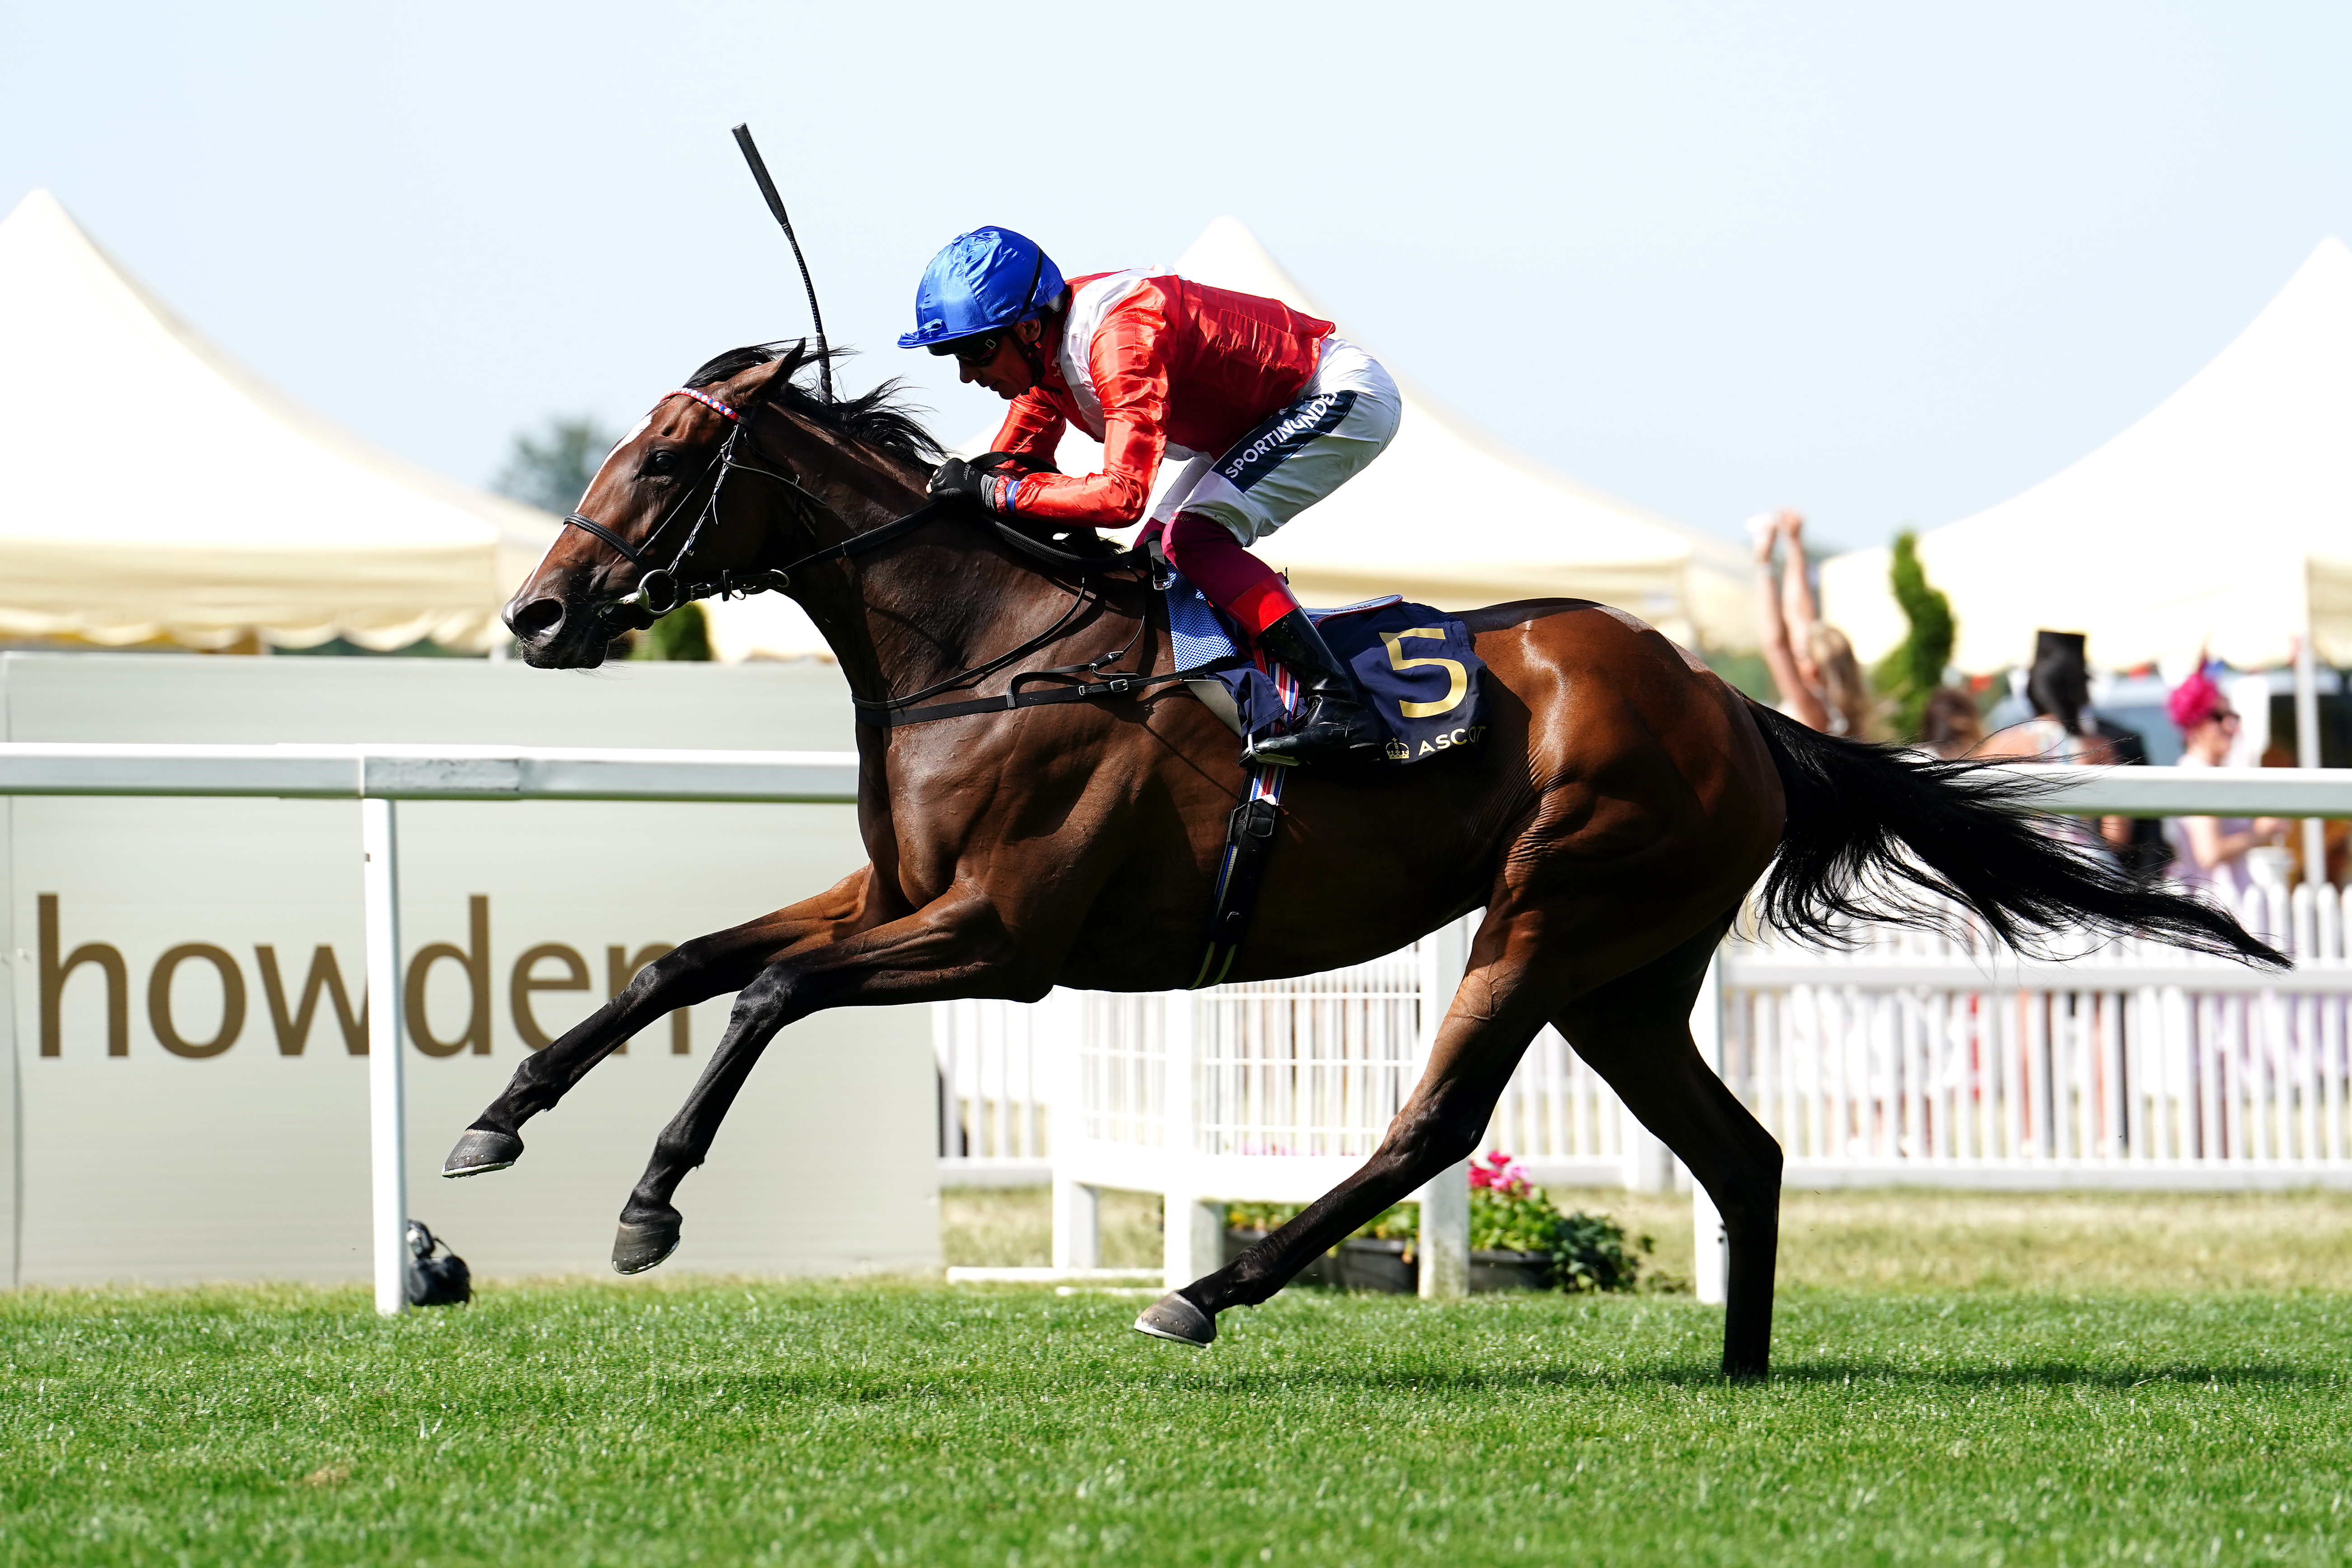 Inspiral ridden by Frankie Dettori on their way to winning the Coronation Stakes at Royal Ascot